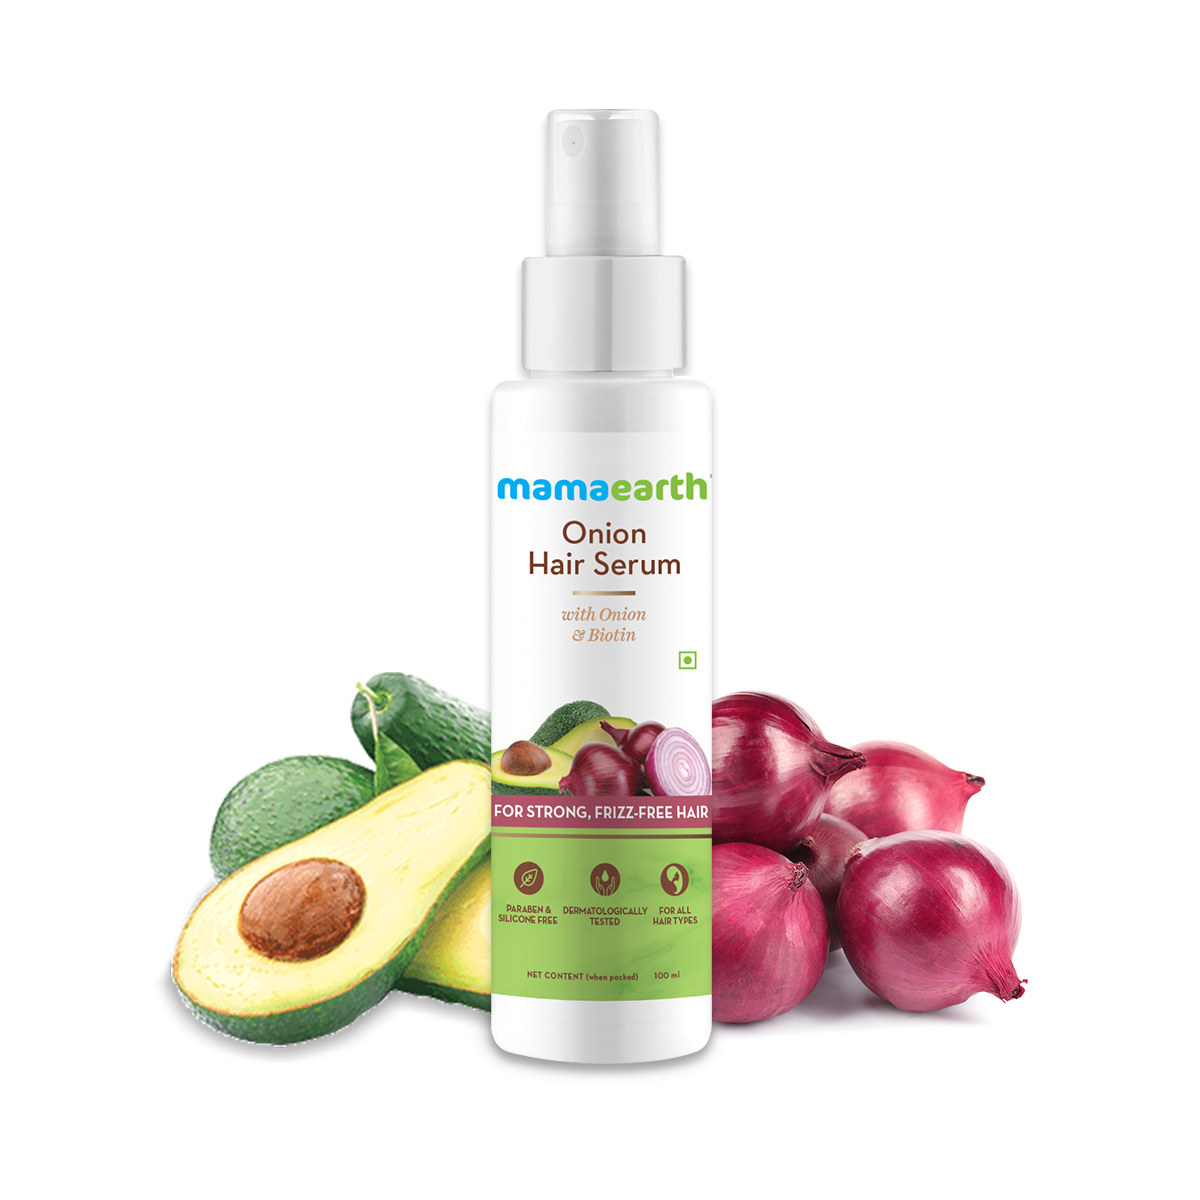 MamaEarth Onion Hair Serum with Onion & Biotin for Strong and Frizz-Free Hair